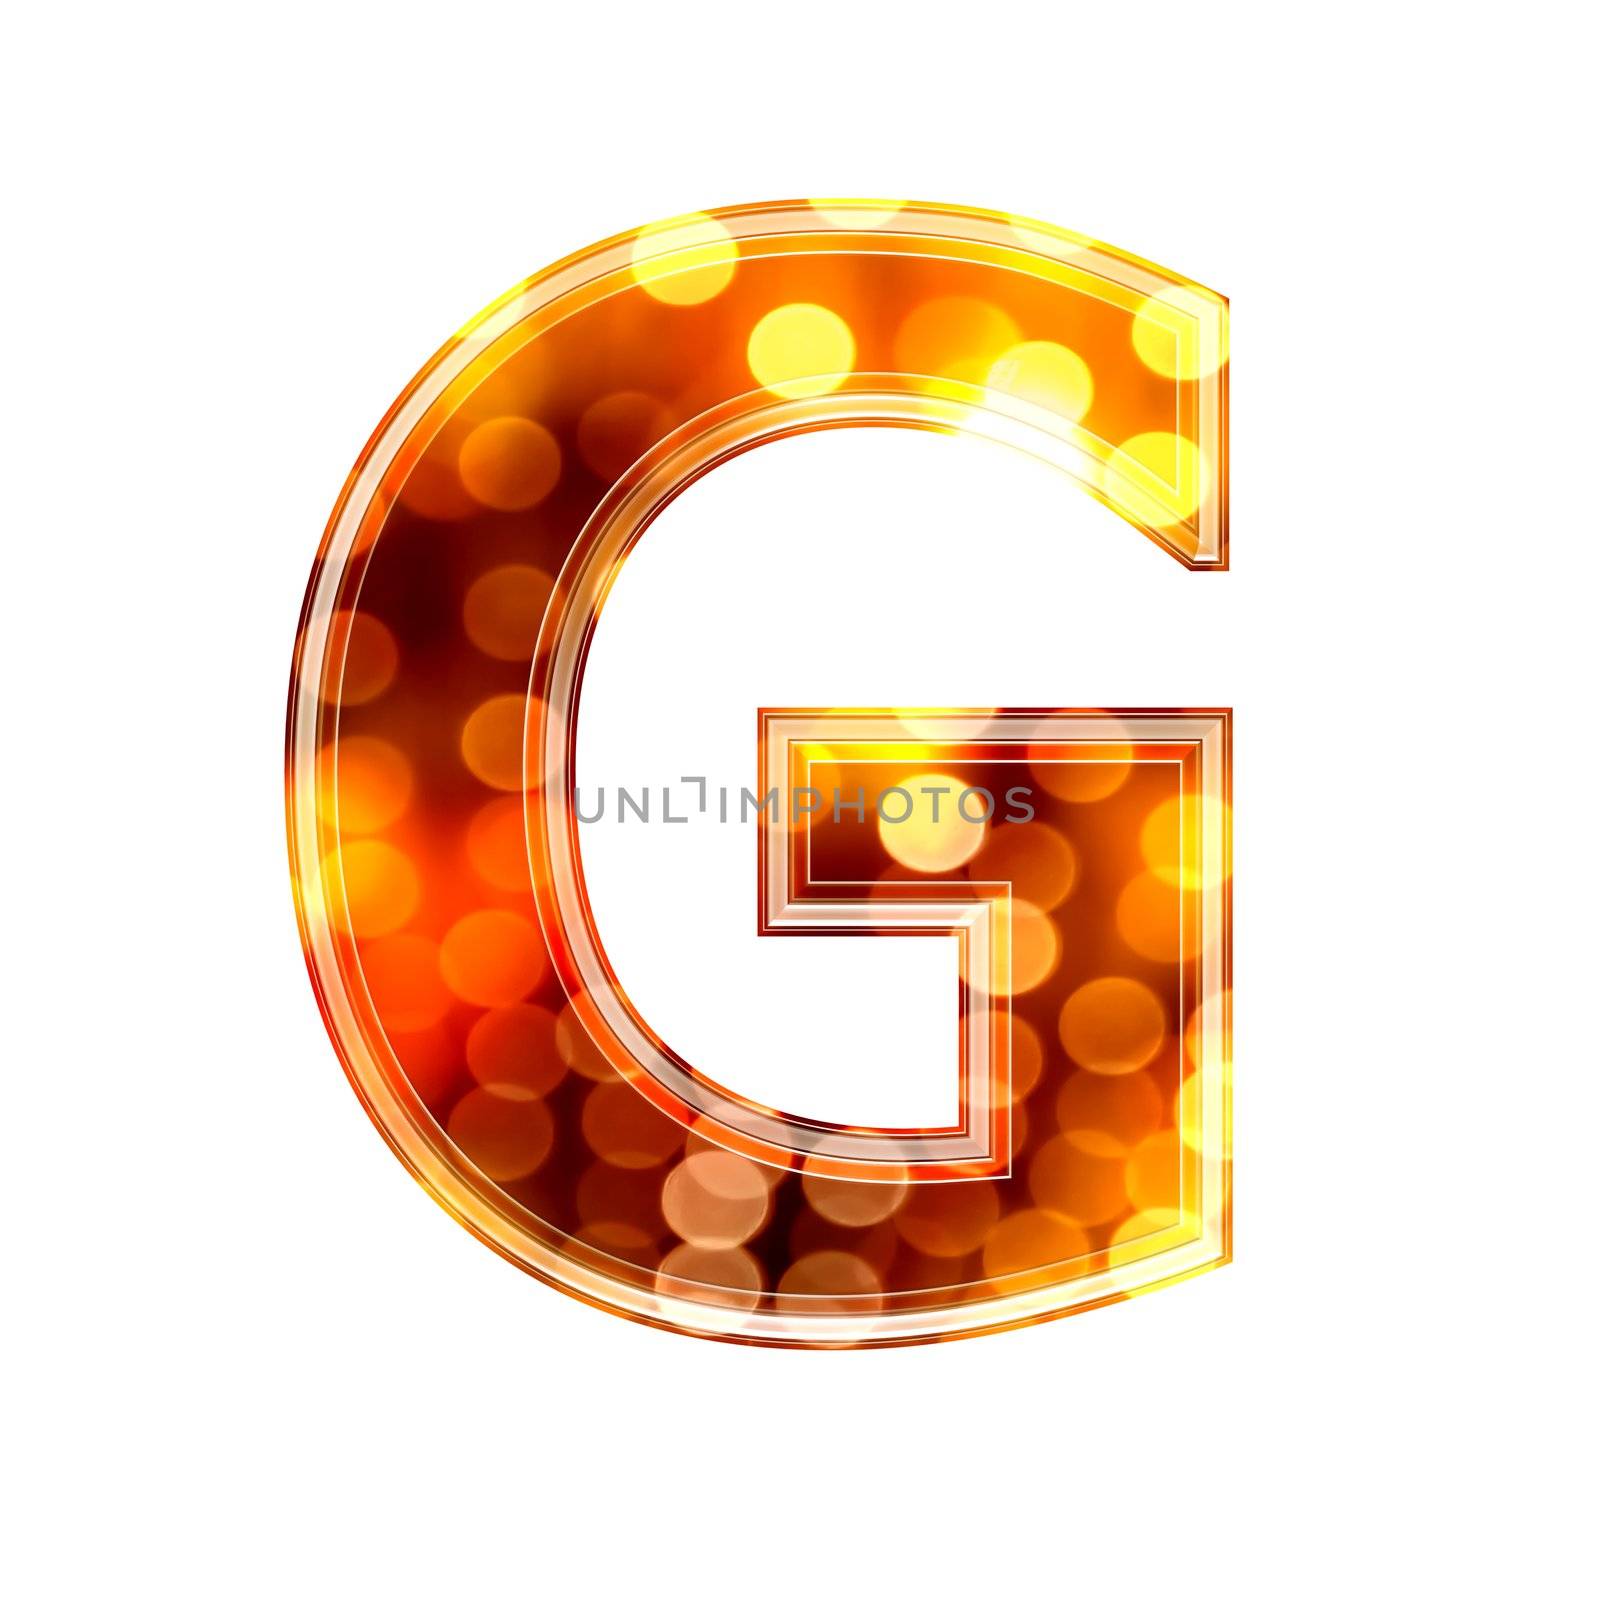 3d letter with glowing lights texture - G